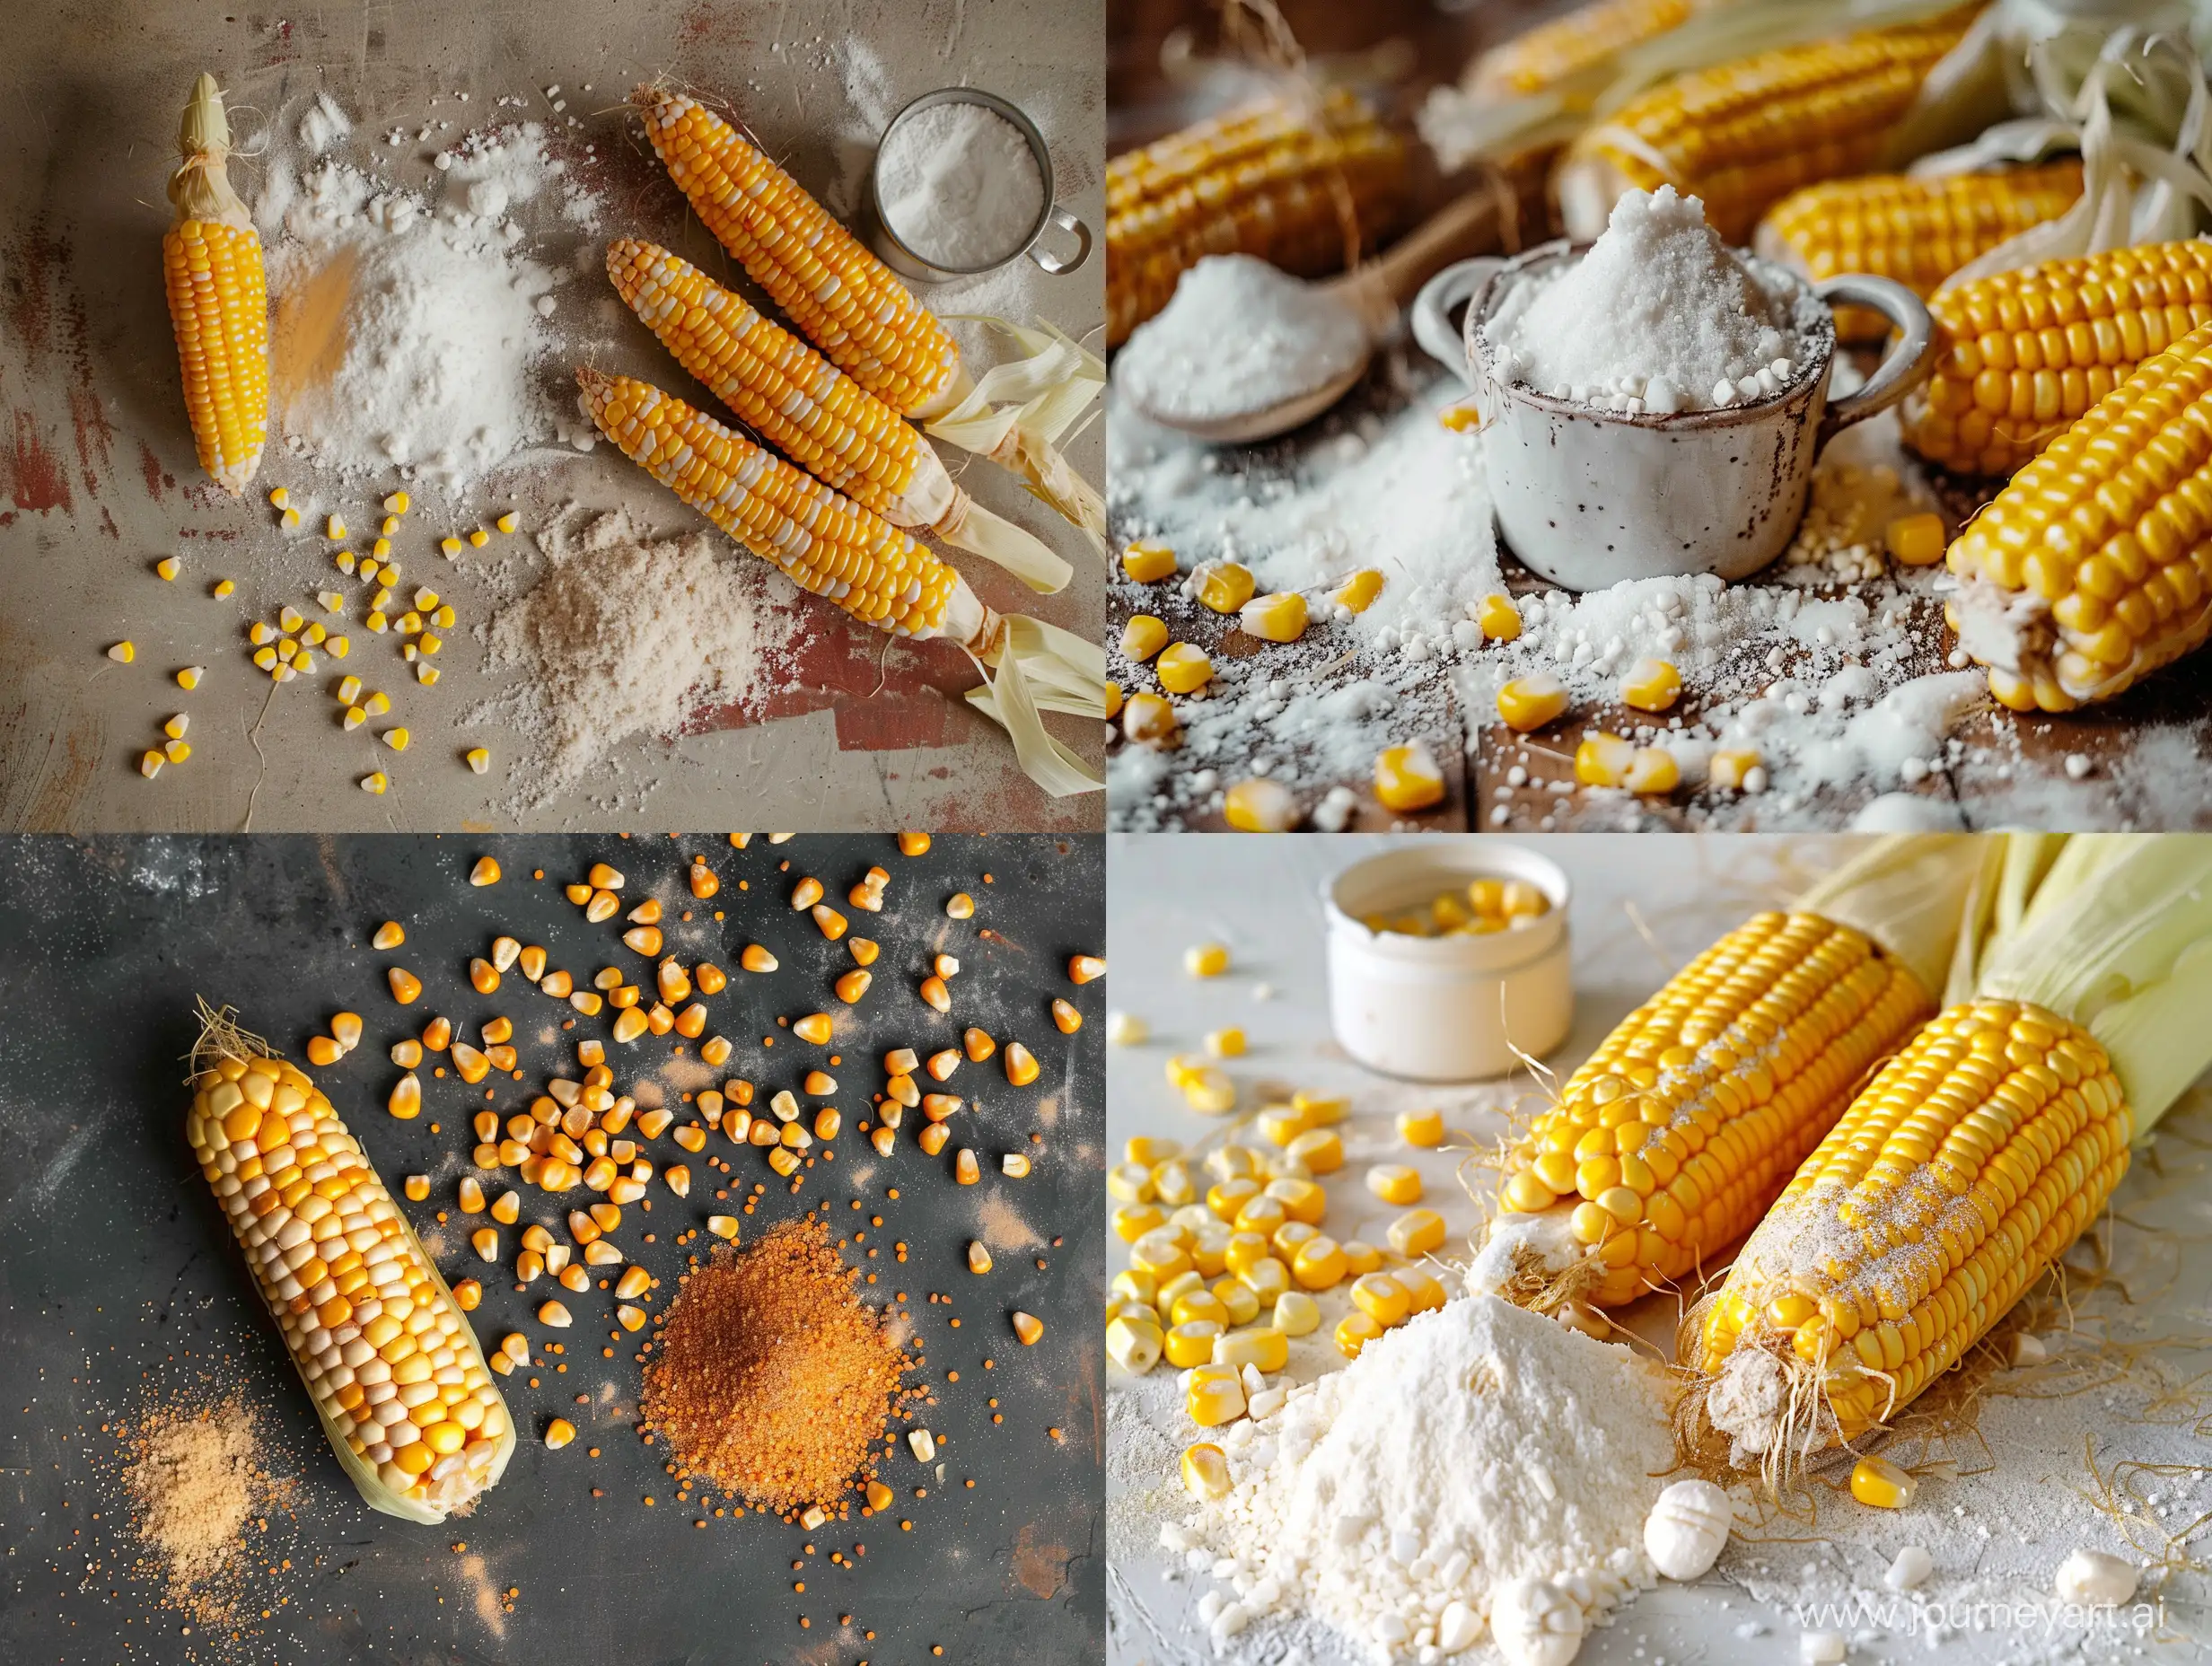 Fresh-Corn-and-Corn-Starch-in-Natural-Light-Photography